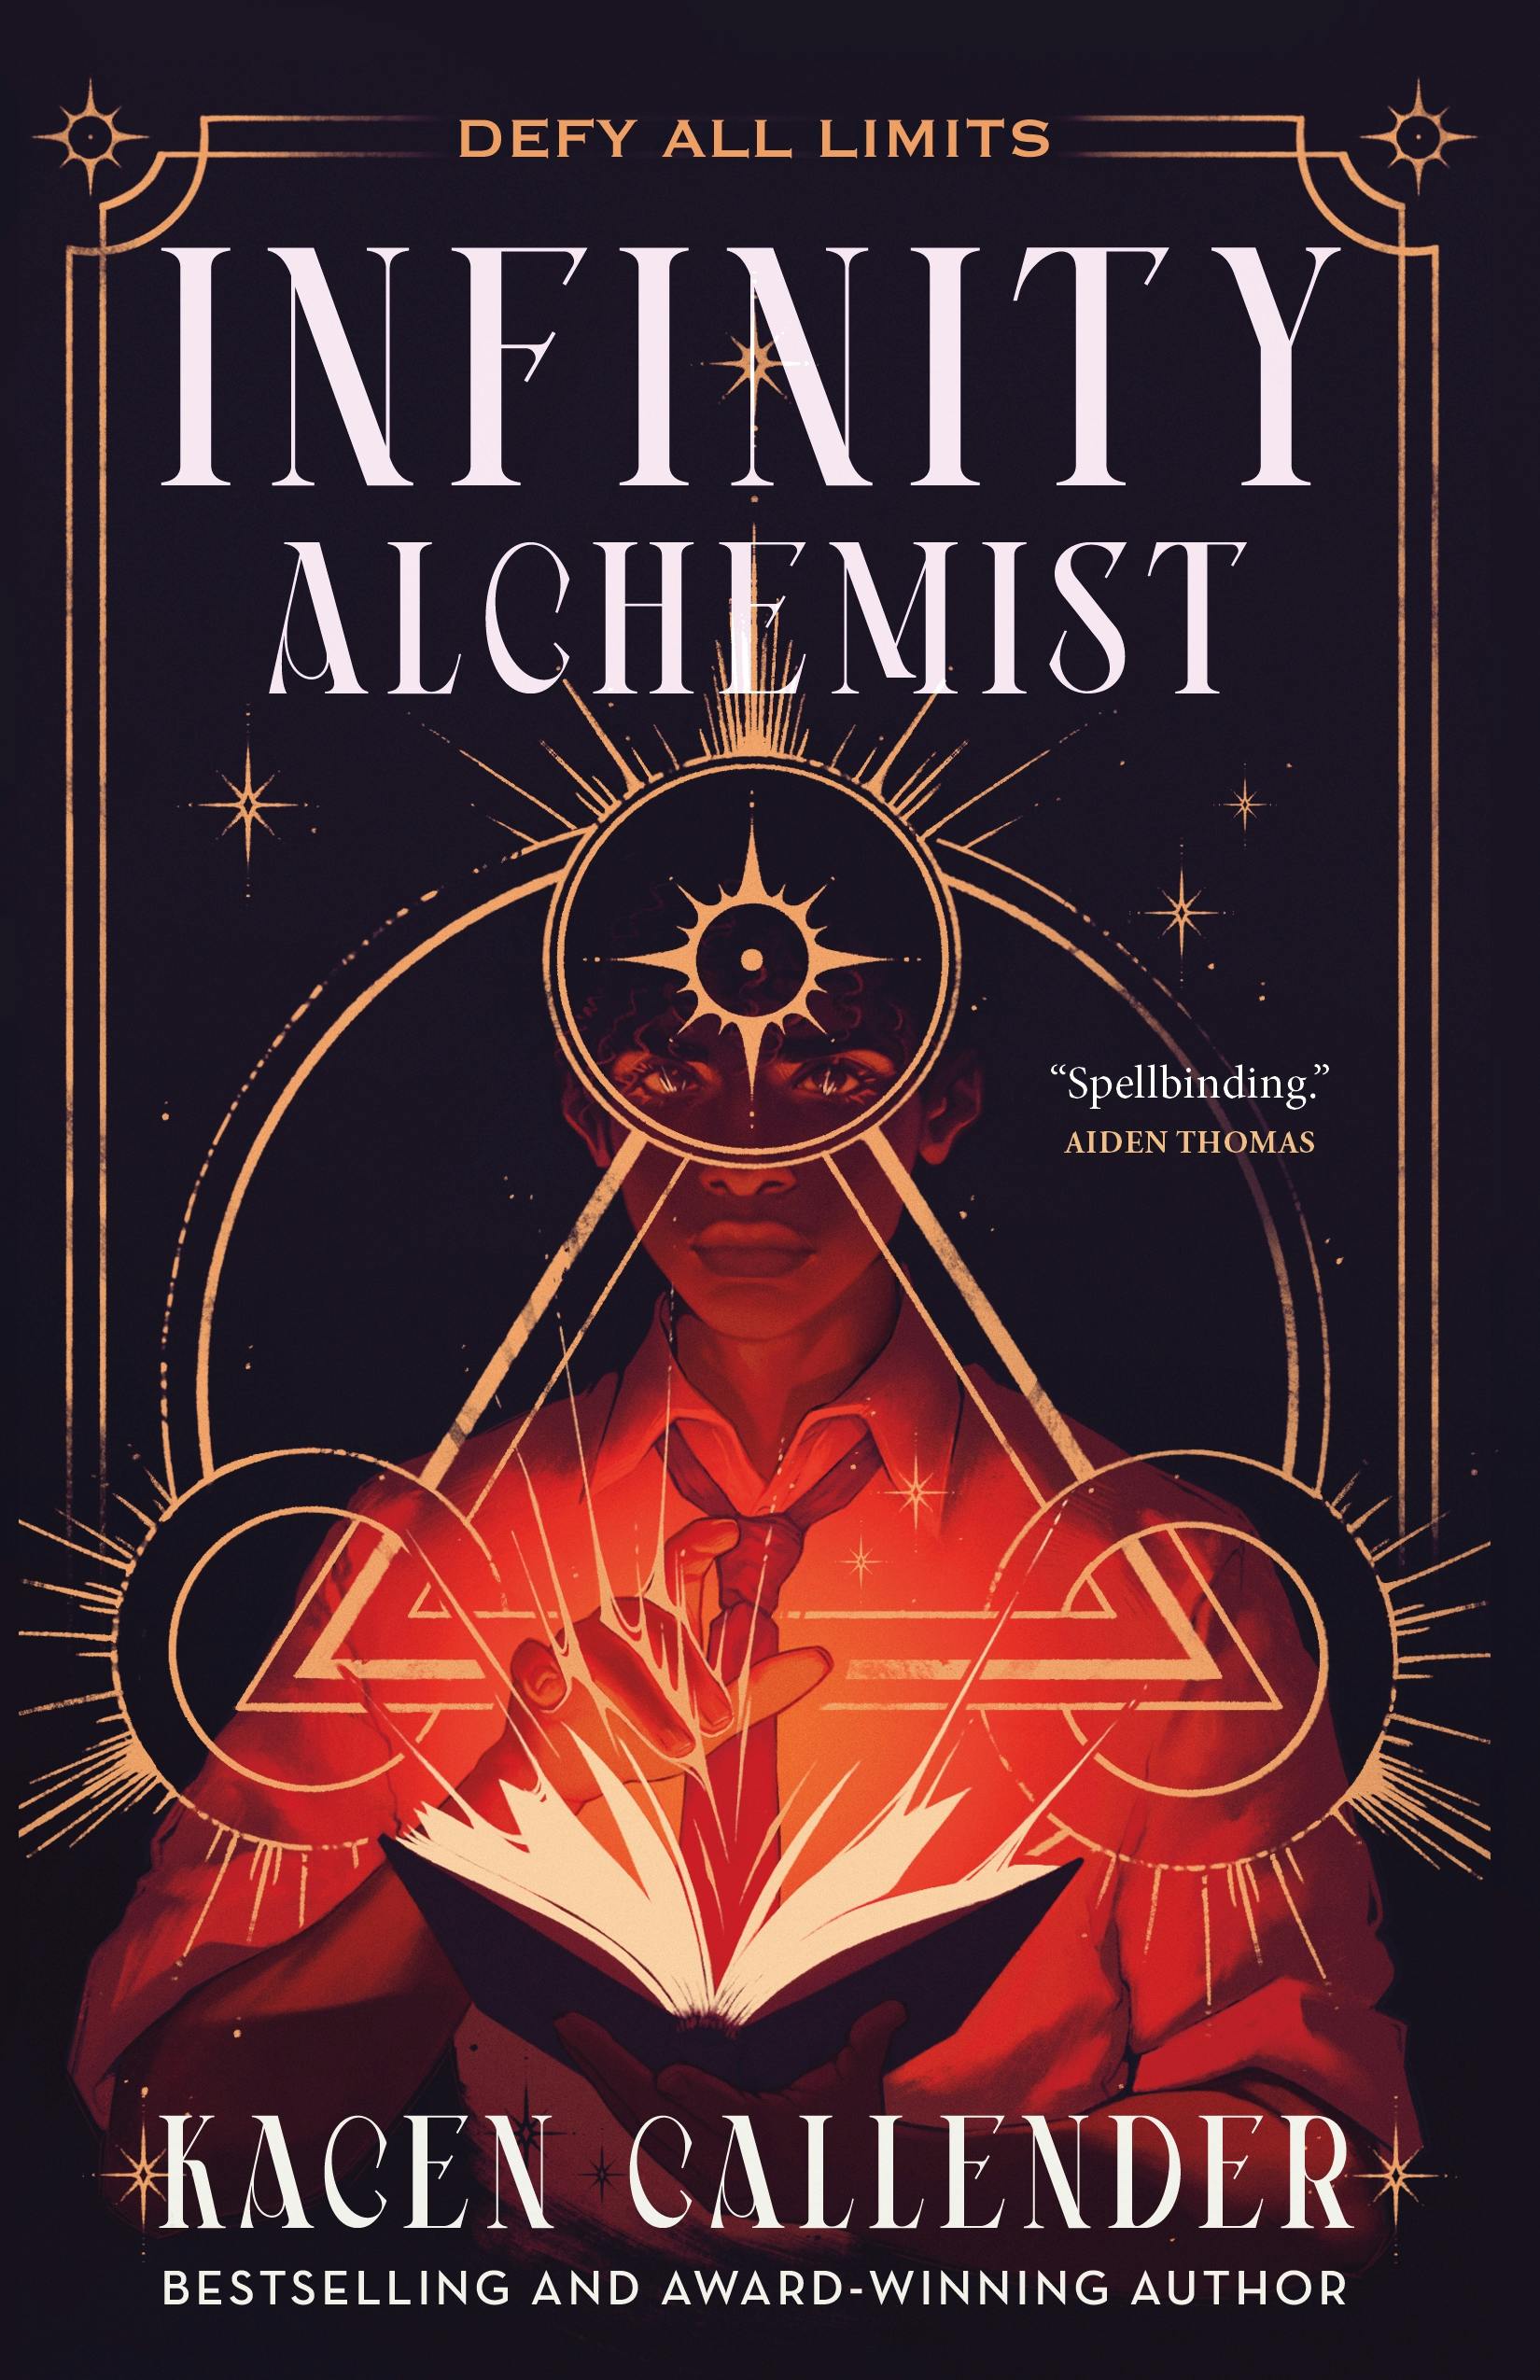 Cover for the book titled as: Infinity Alchemist